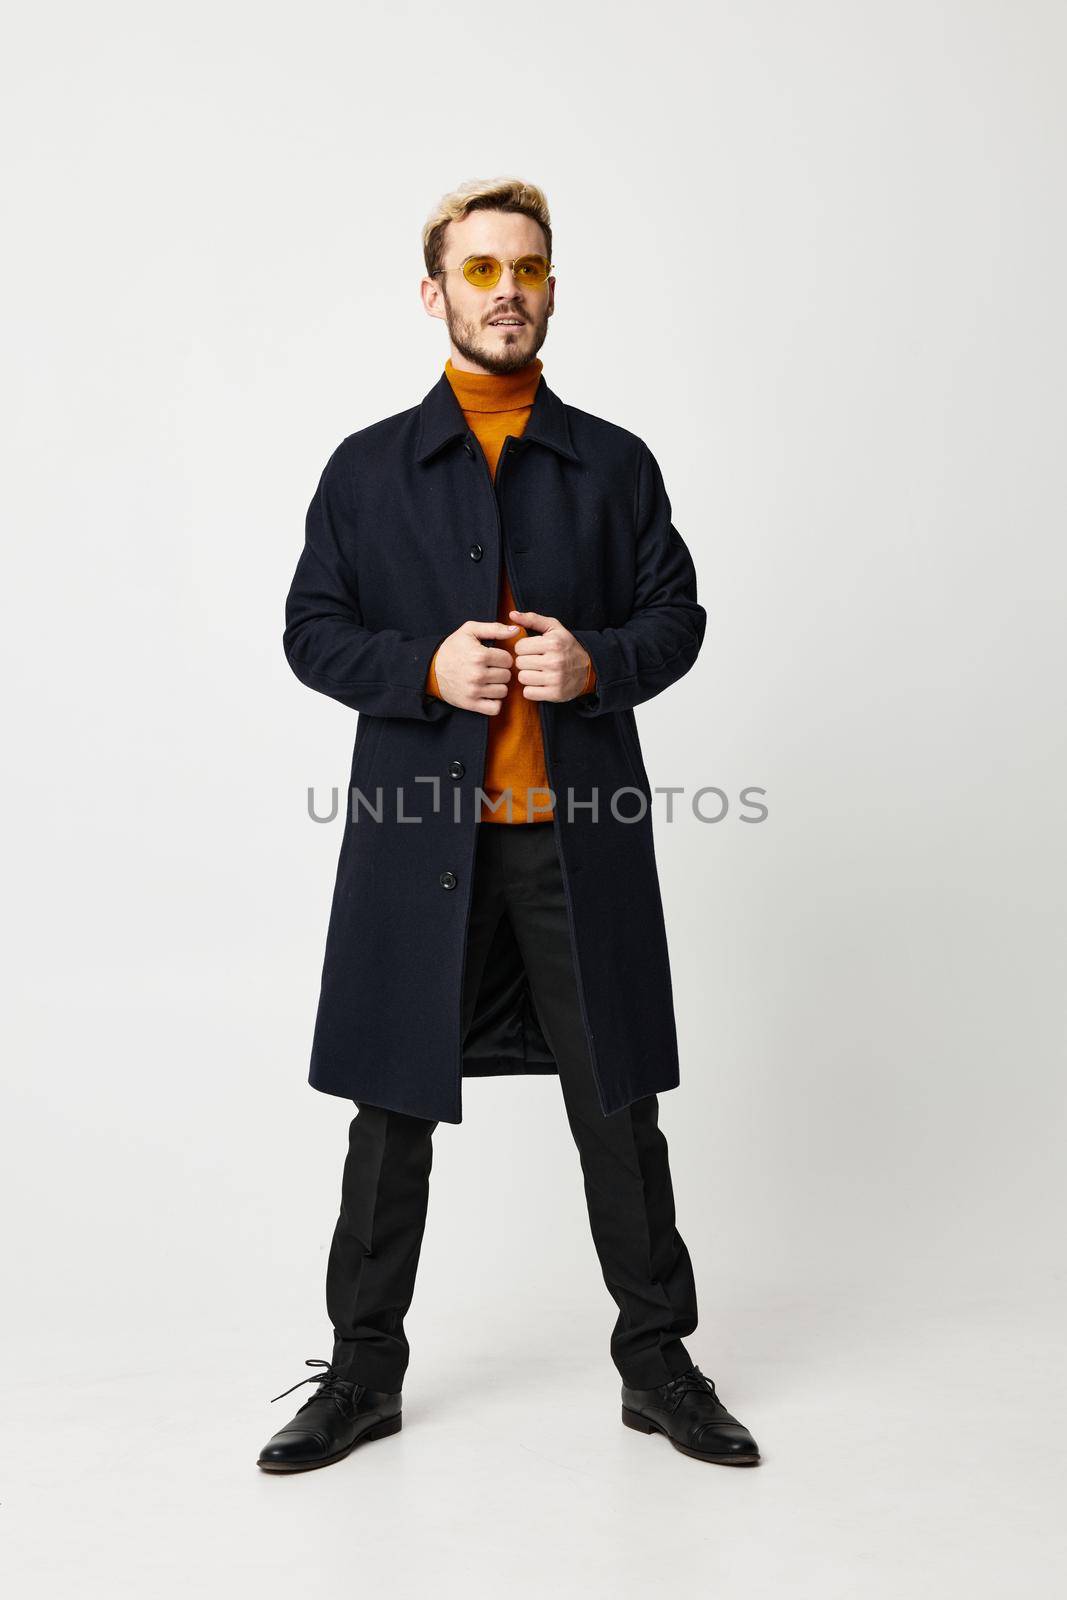 fashionable man in a dark coat spread his legs shoulder-width apart on a light background and an orange sweater model by SHOTPRIME